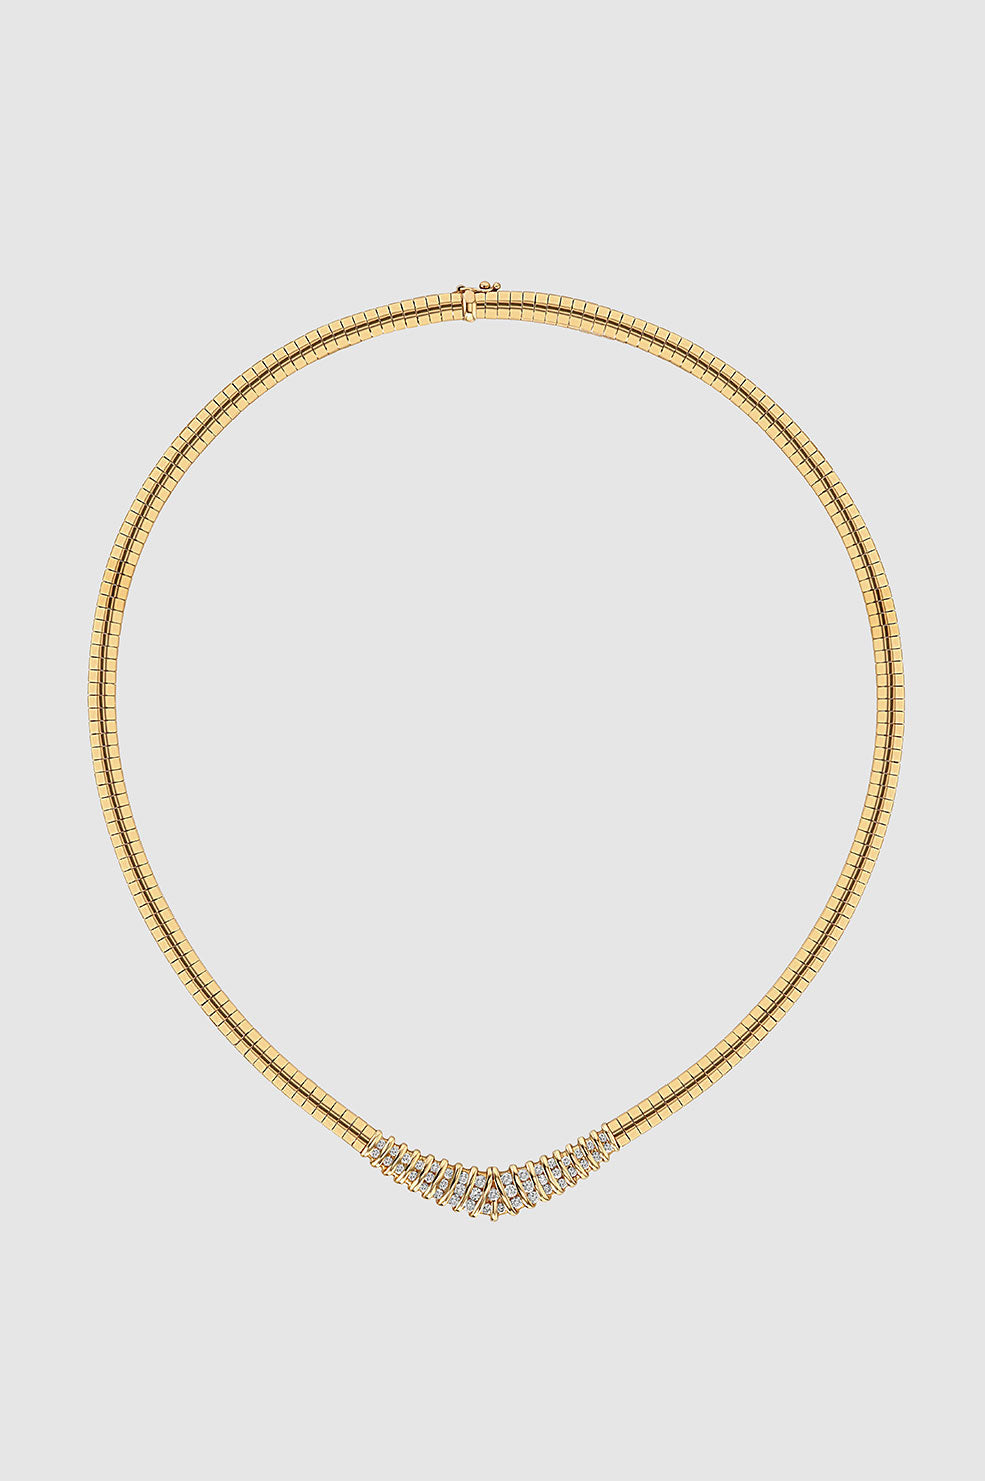 ANINE BING Coil Diamond Necklace - 14k Gold - Front View